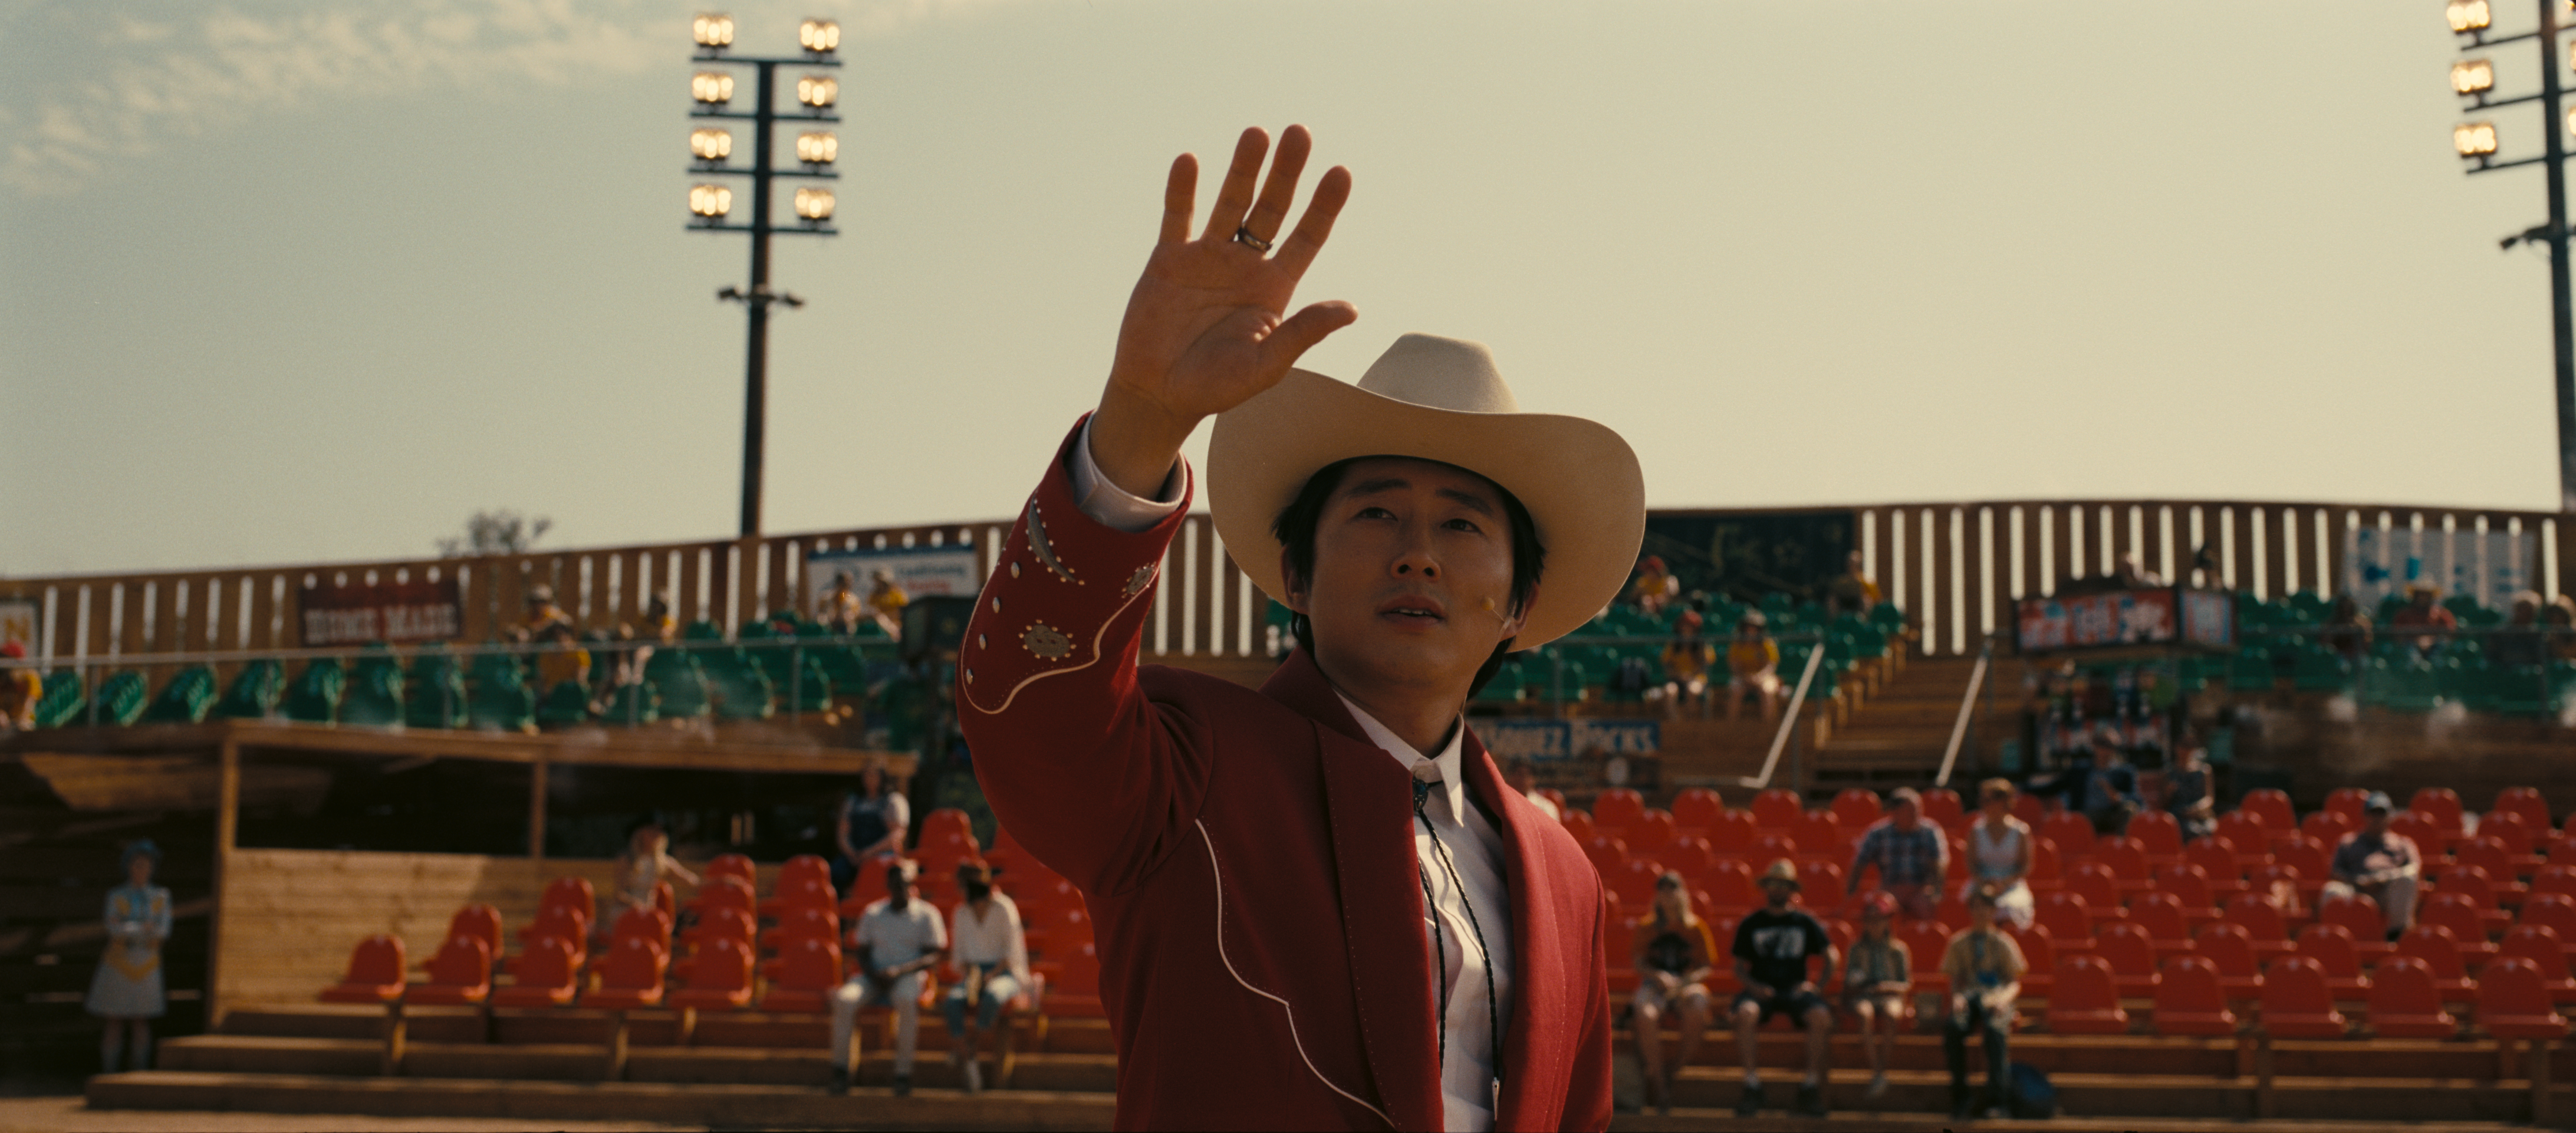 Steven Yeun as Ricky “Jupe” Park in Nope, written, produced and directed by Jordan Peele.